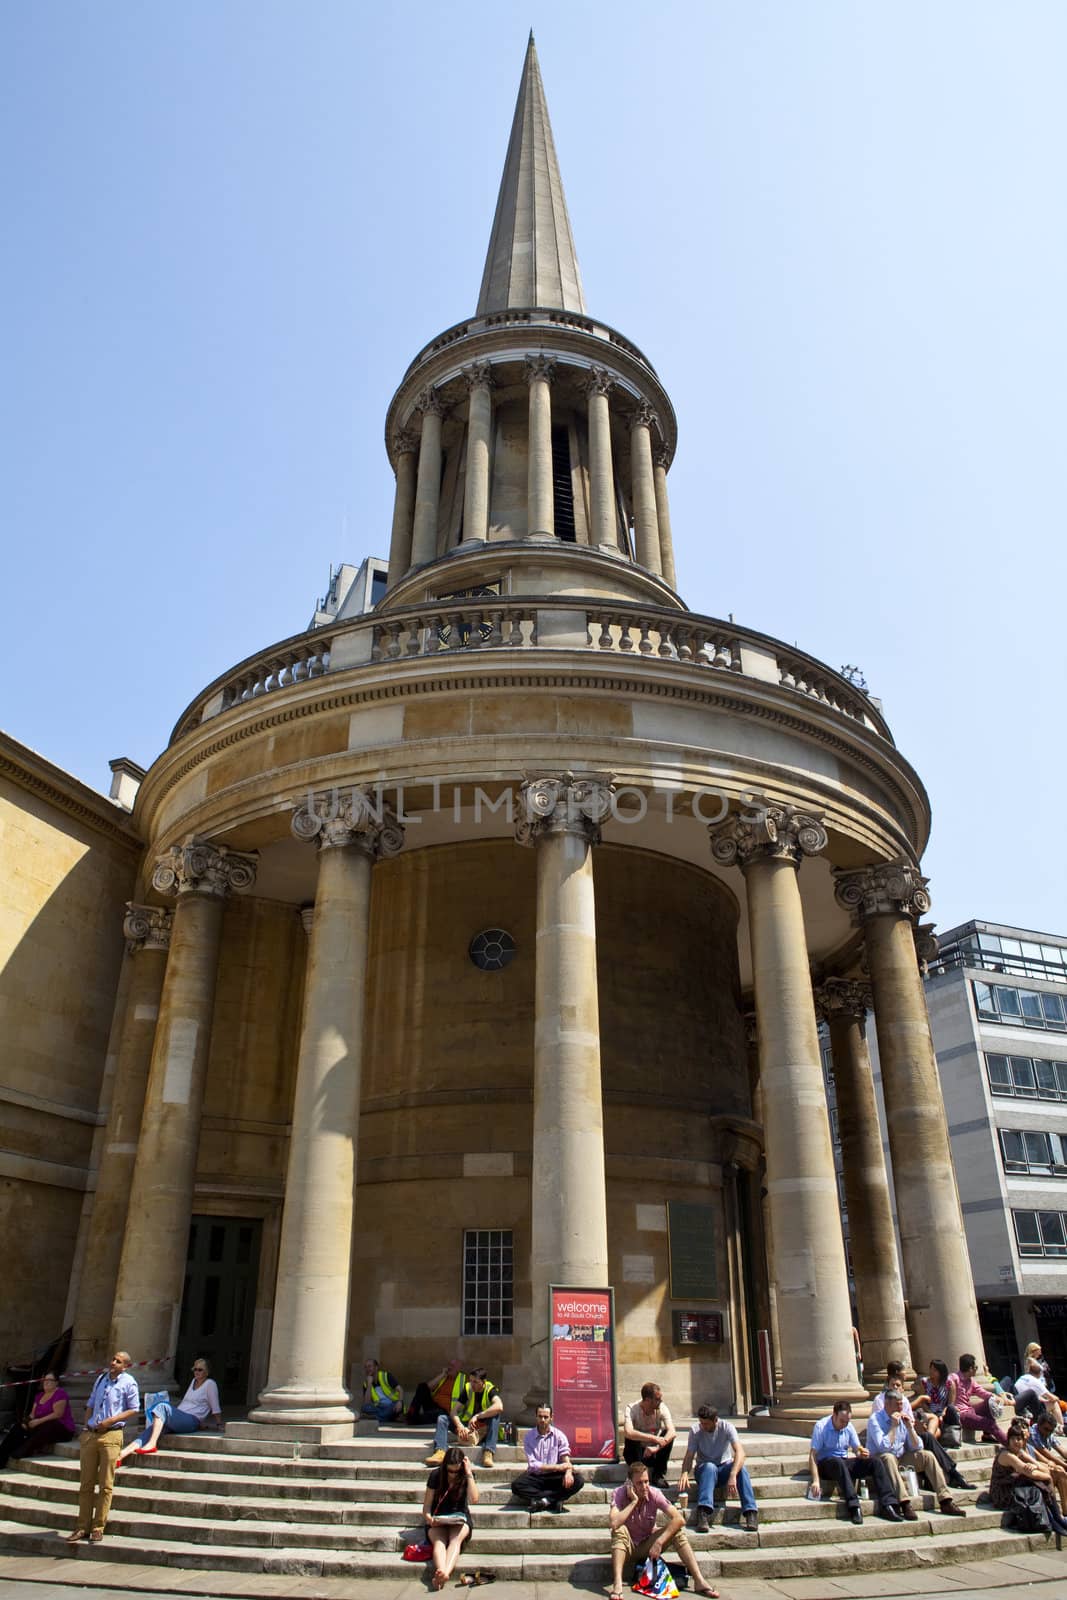 All Souls Church located in Langham Place, London.